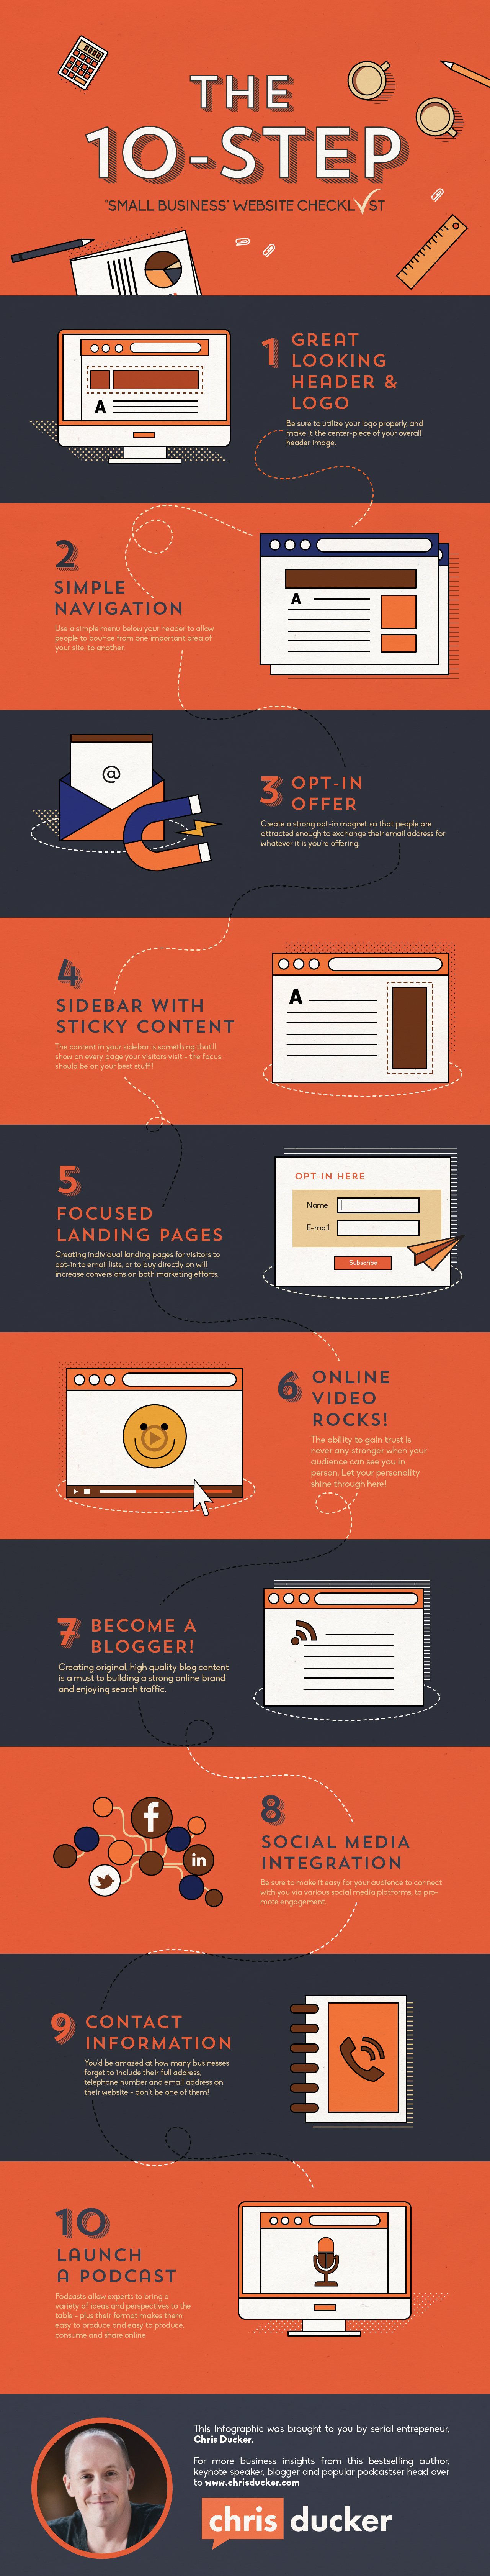 The 10-Step Small Business Website Checklist - #Infographic